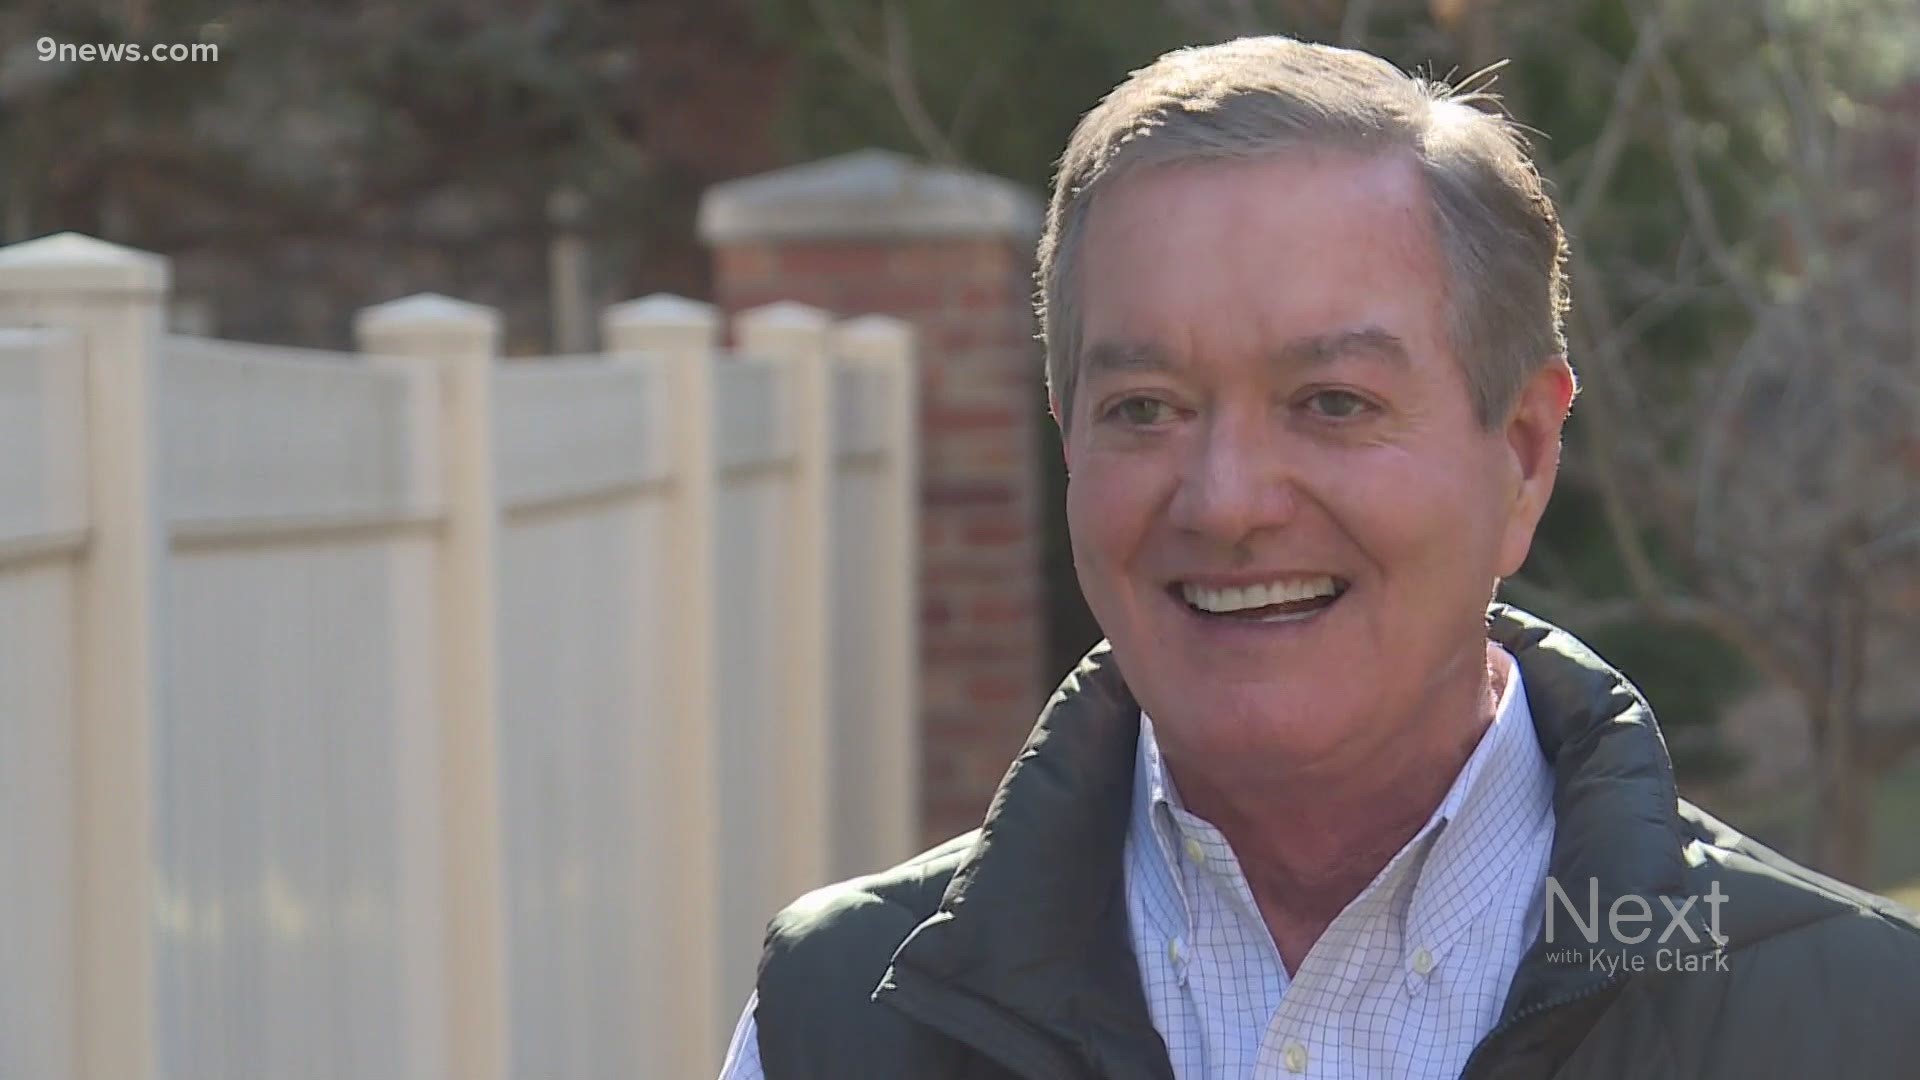 Former Gov. Bill Owens predicts 2022 will be a good year for Republicans in Colorado. For now, he says it's time to transition to the new president-elect, Joe Biden.